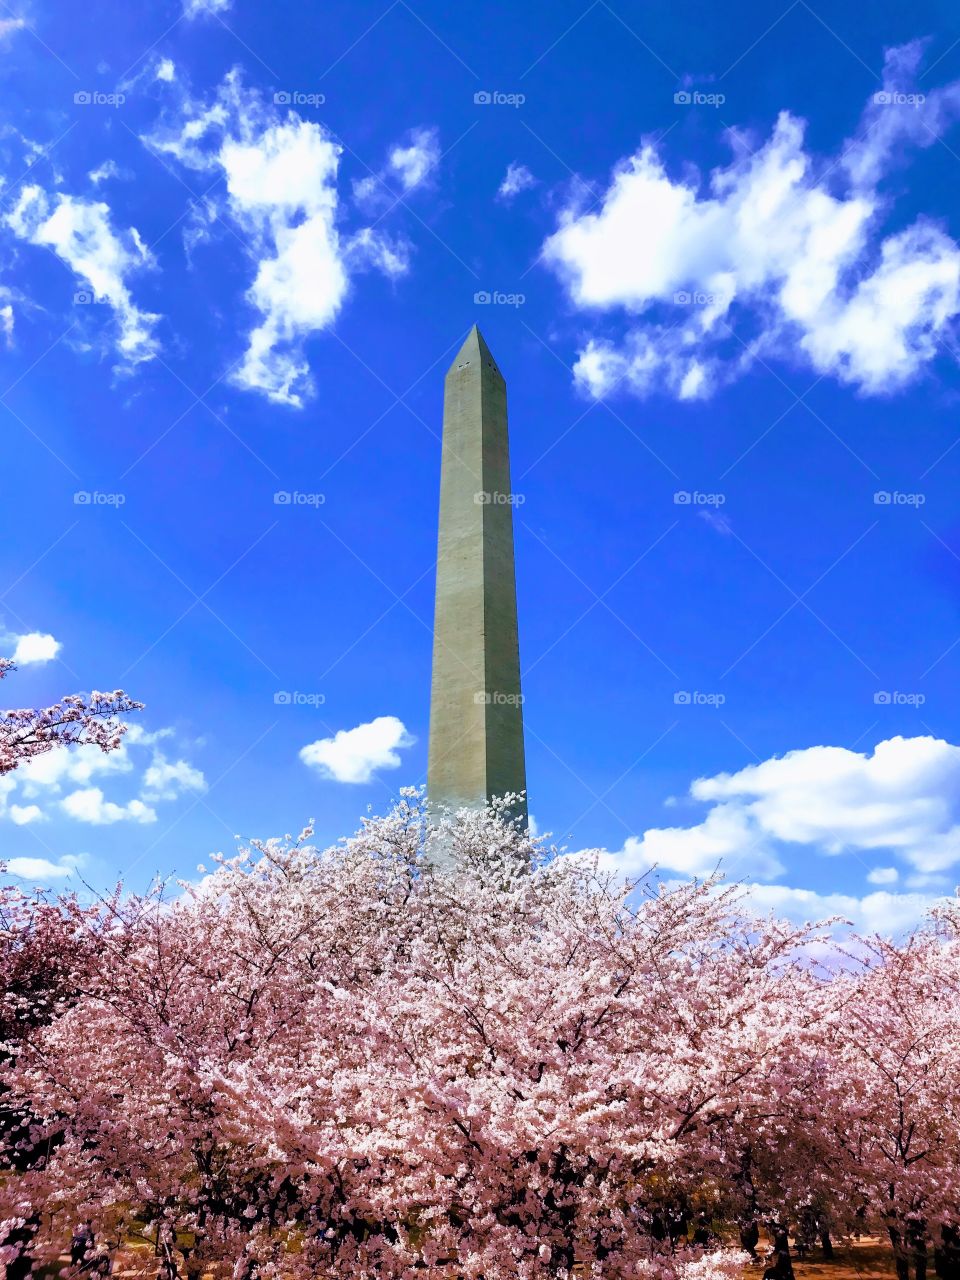 The Washington Monument rises above the cherry blossoms in full bloom in Washington DC.